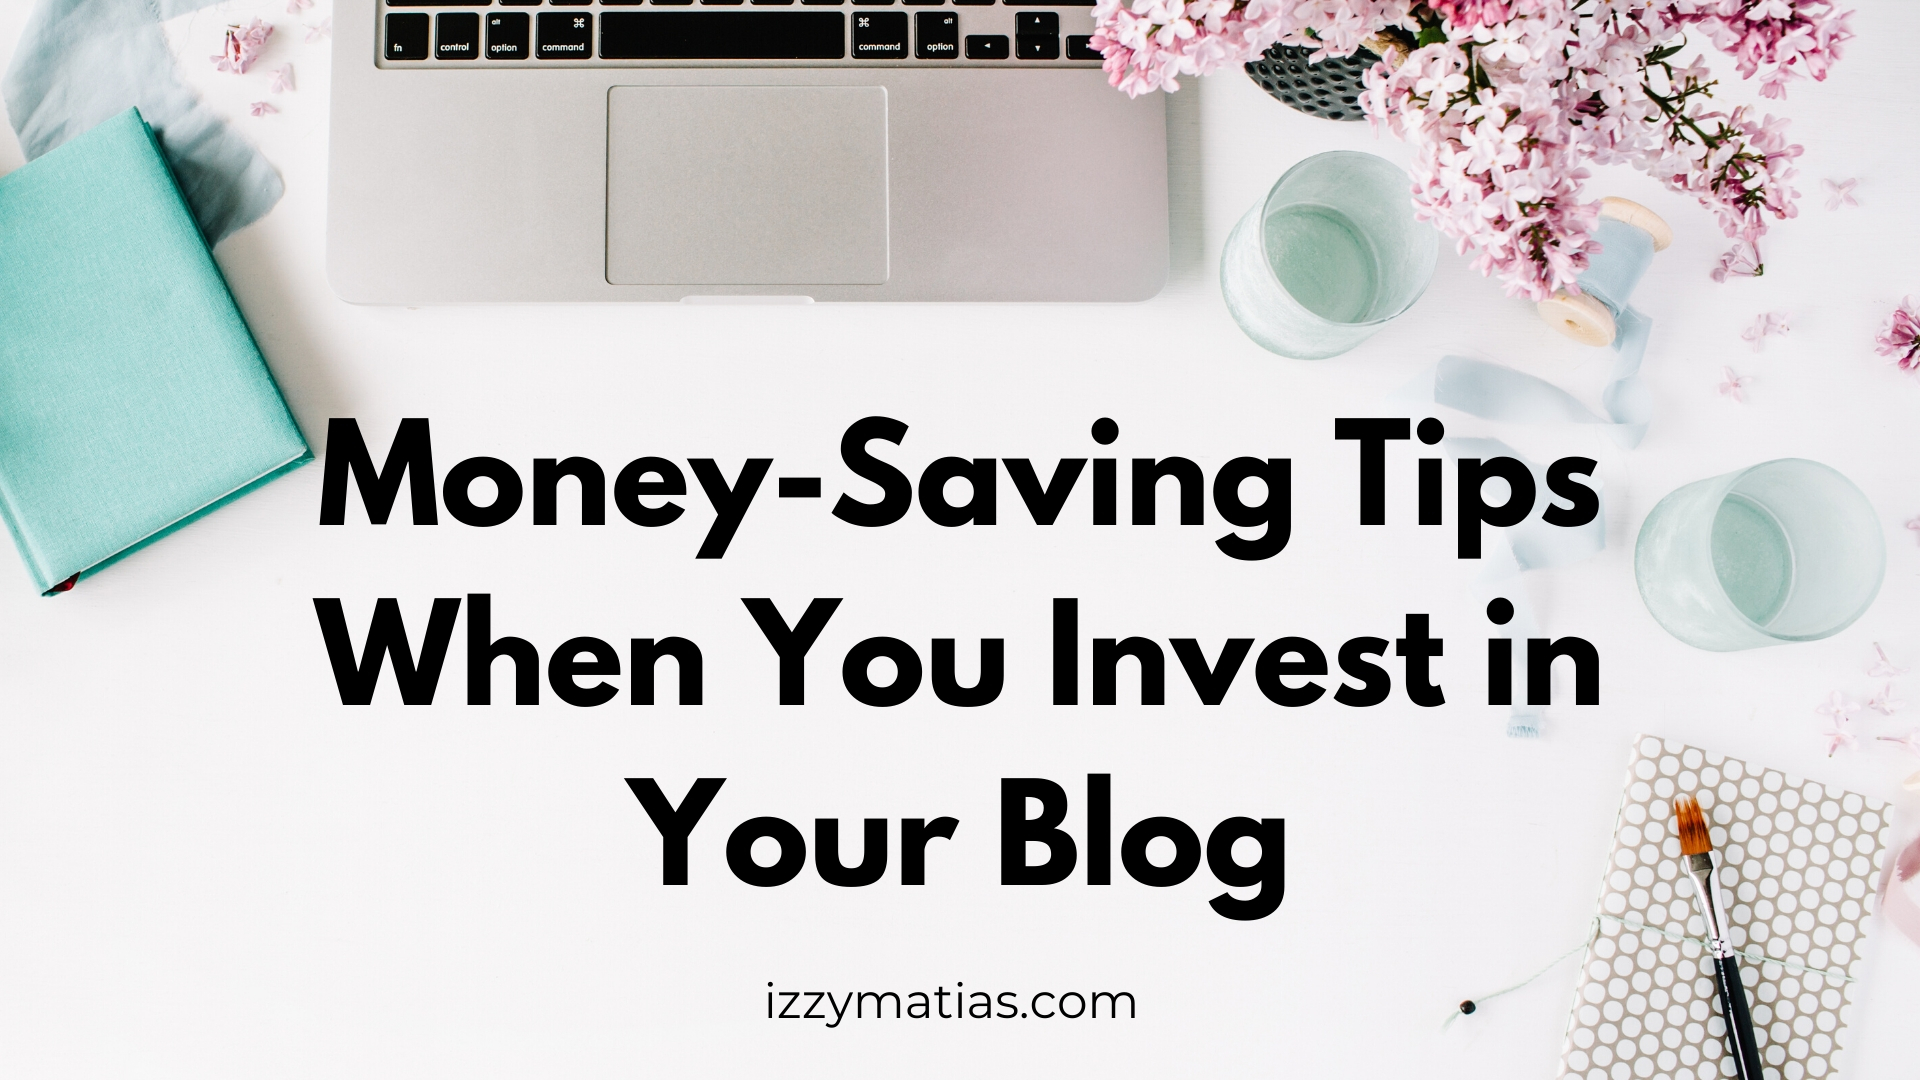 Learn these money-saving tips when you invest in your blog. Find out how to save money when you purchase blogging tools and resources. #moneysavingtips #bloggingtips #bloggingtools #savemoney 